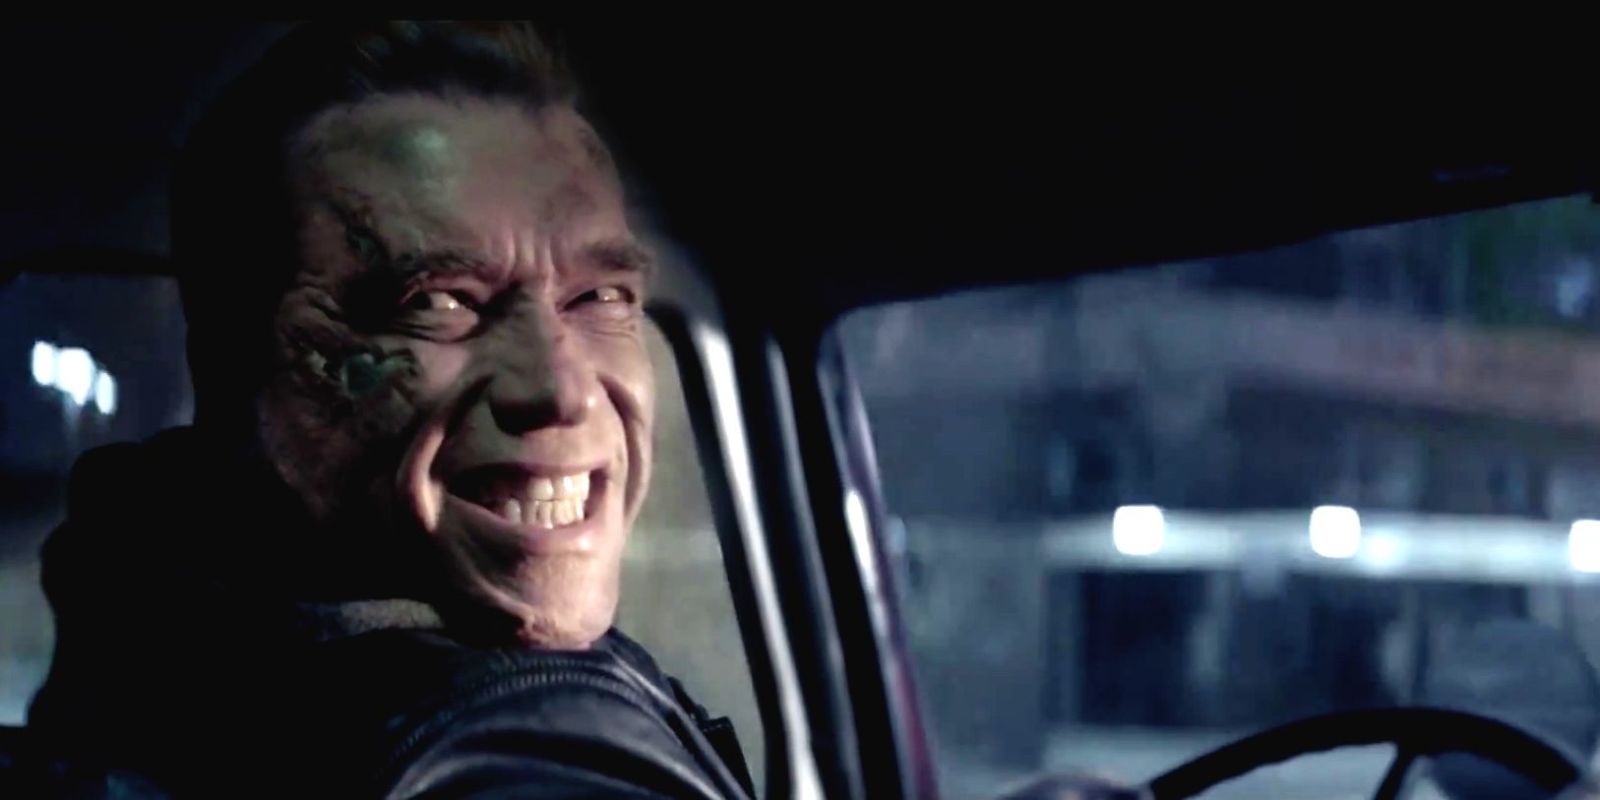 TERMINATOR GENISYS gets more Wrong than just Spelling